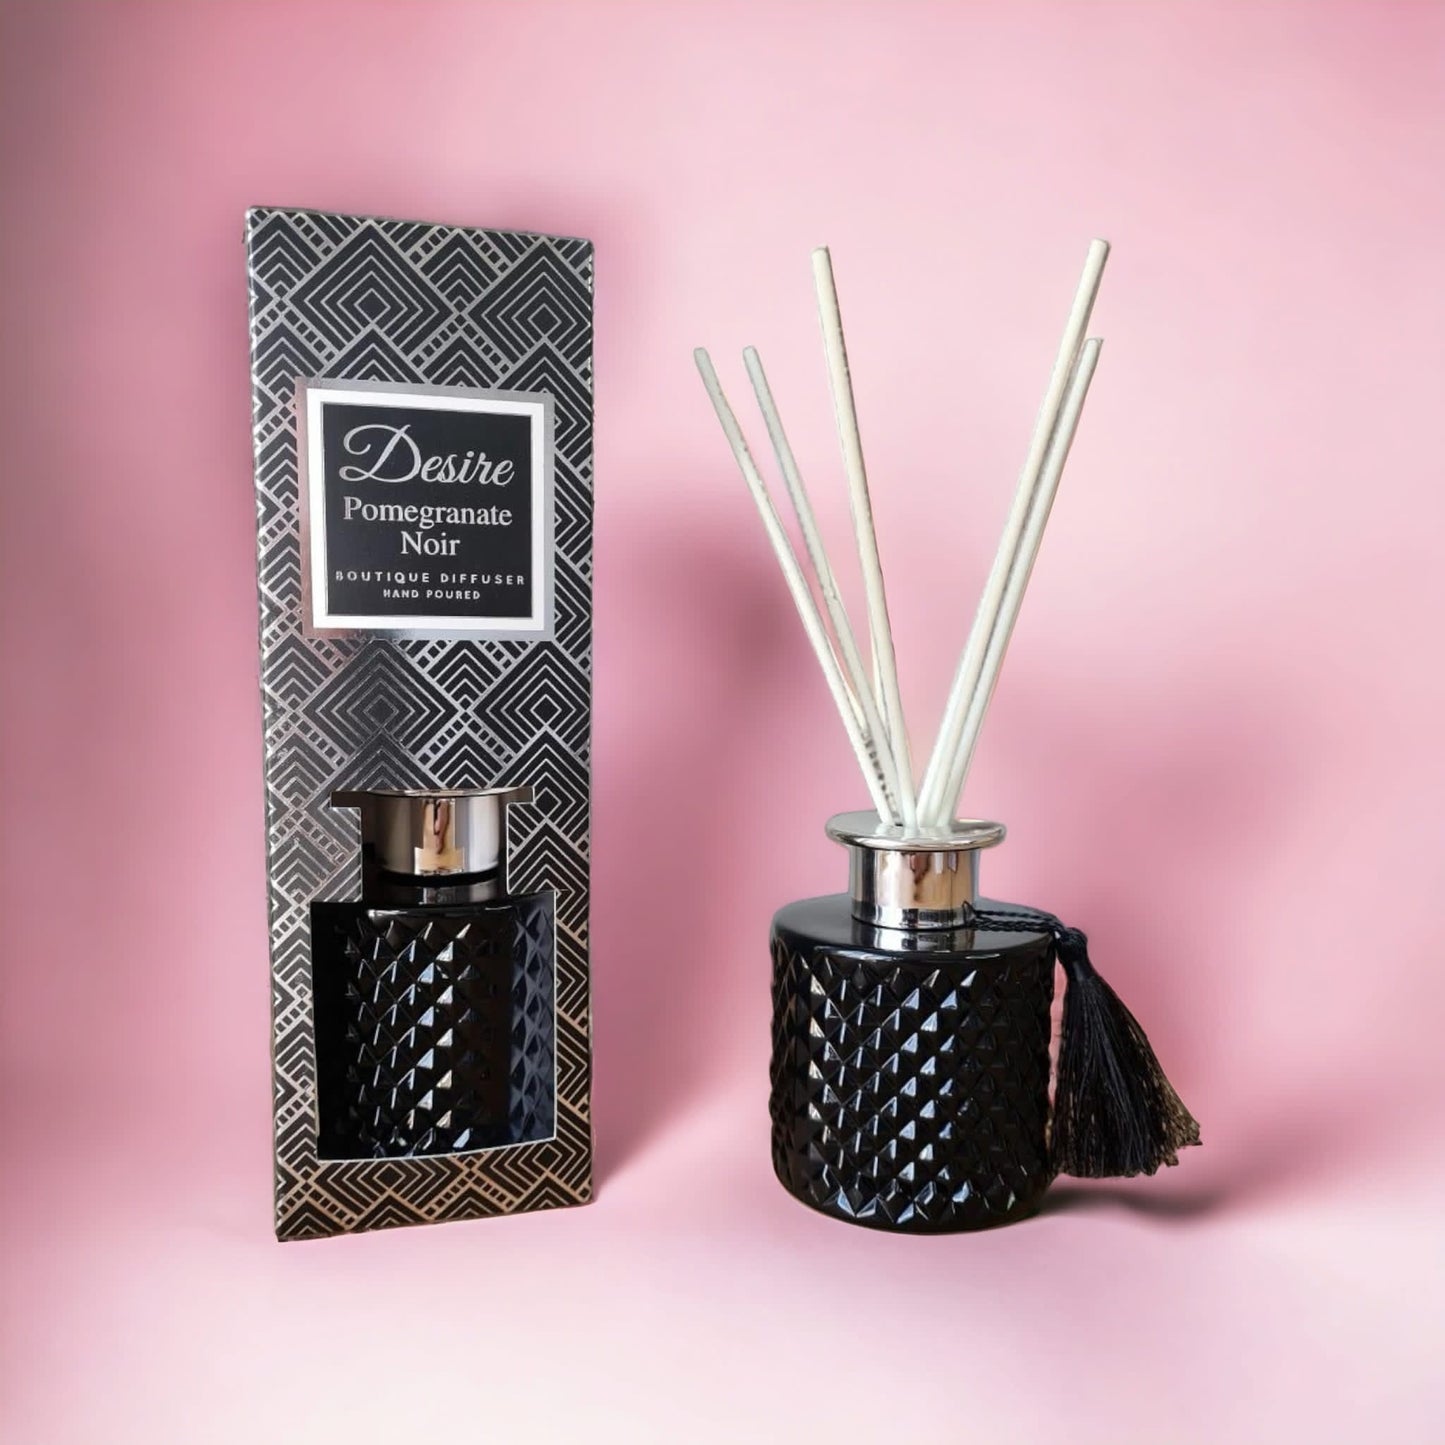 A Pomegranate Noir Reed Diffuser from The Soap Gal x, featuring exquisite design and its packaging against a pink background.